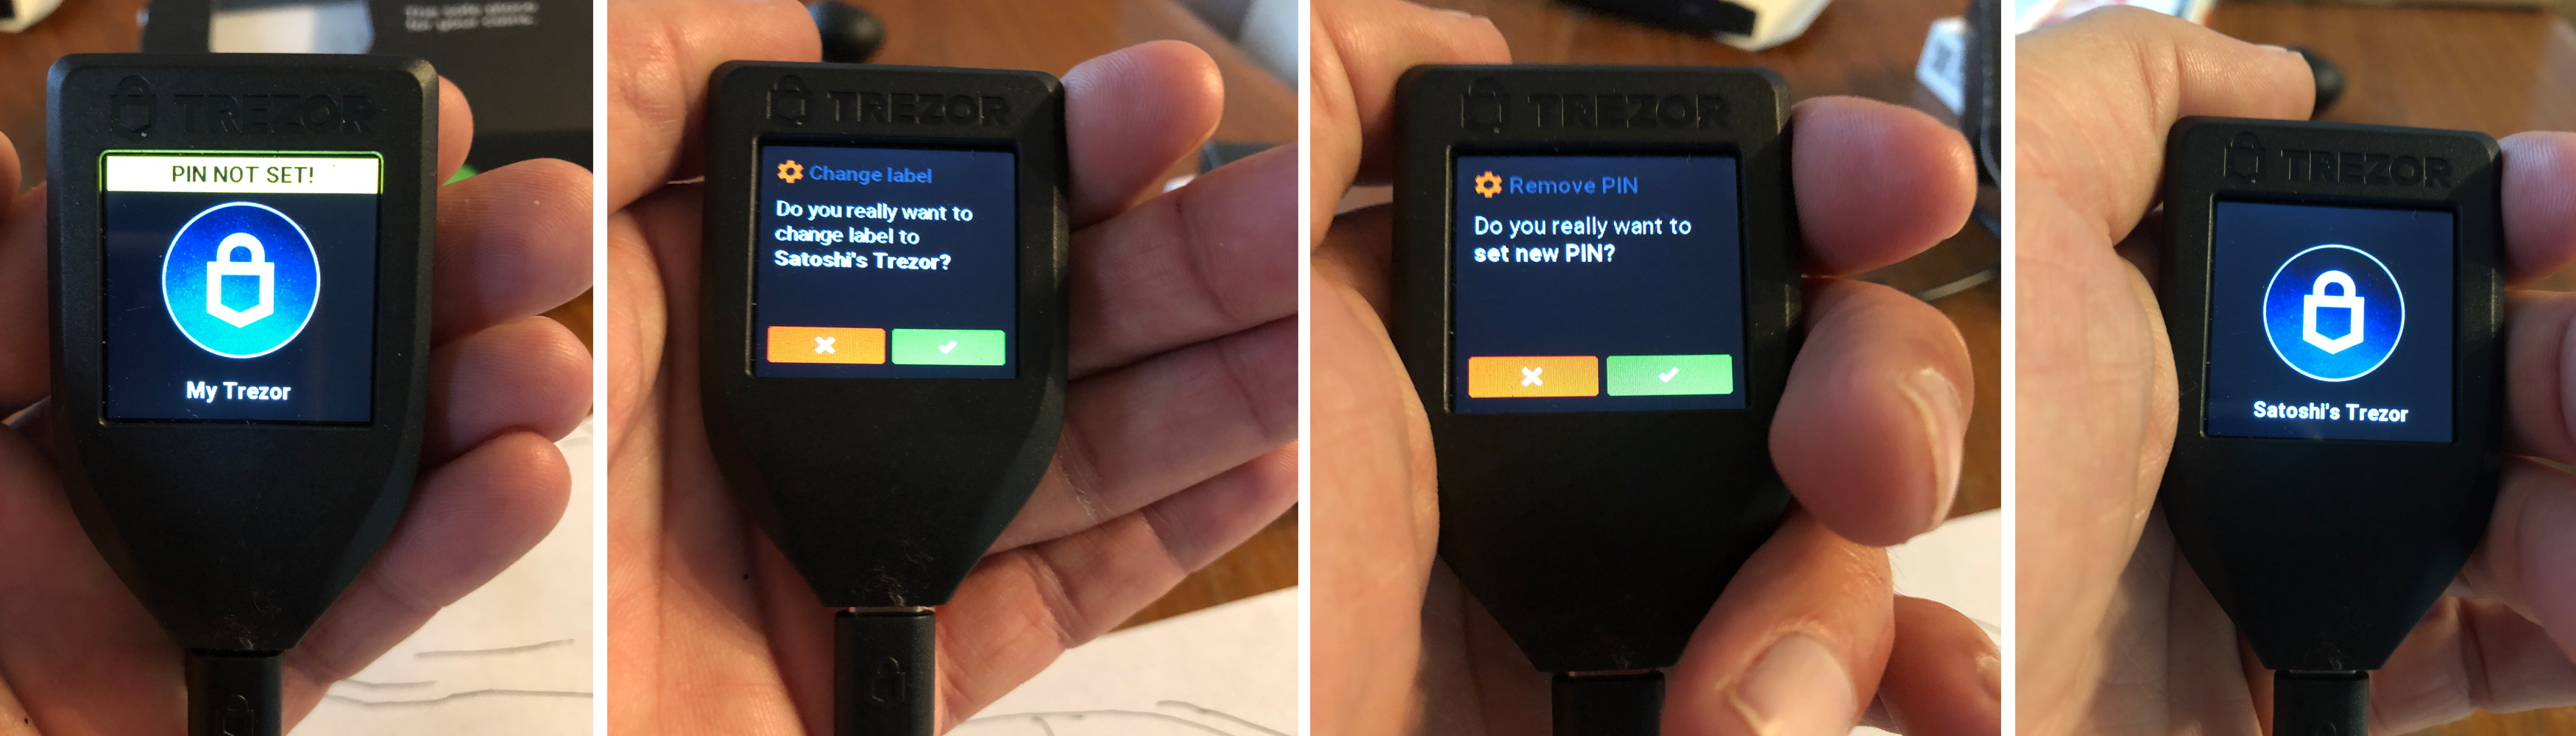 An In-Depth Look at the Trezor Model T Hardware Wallet